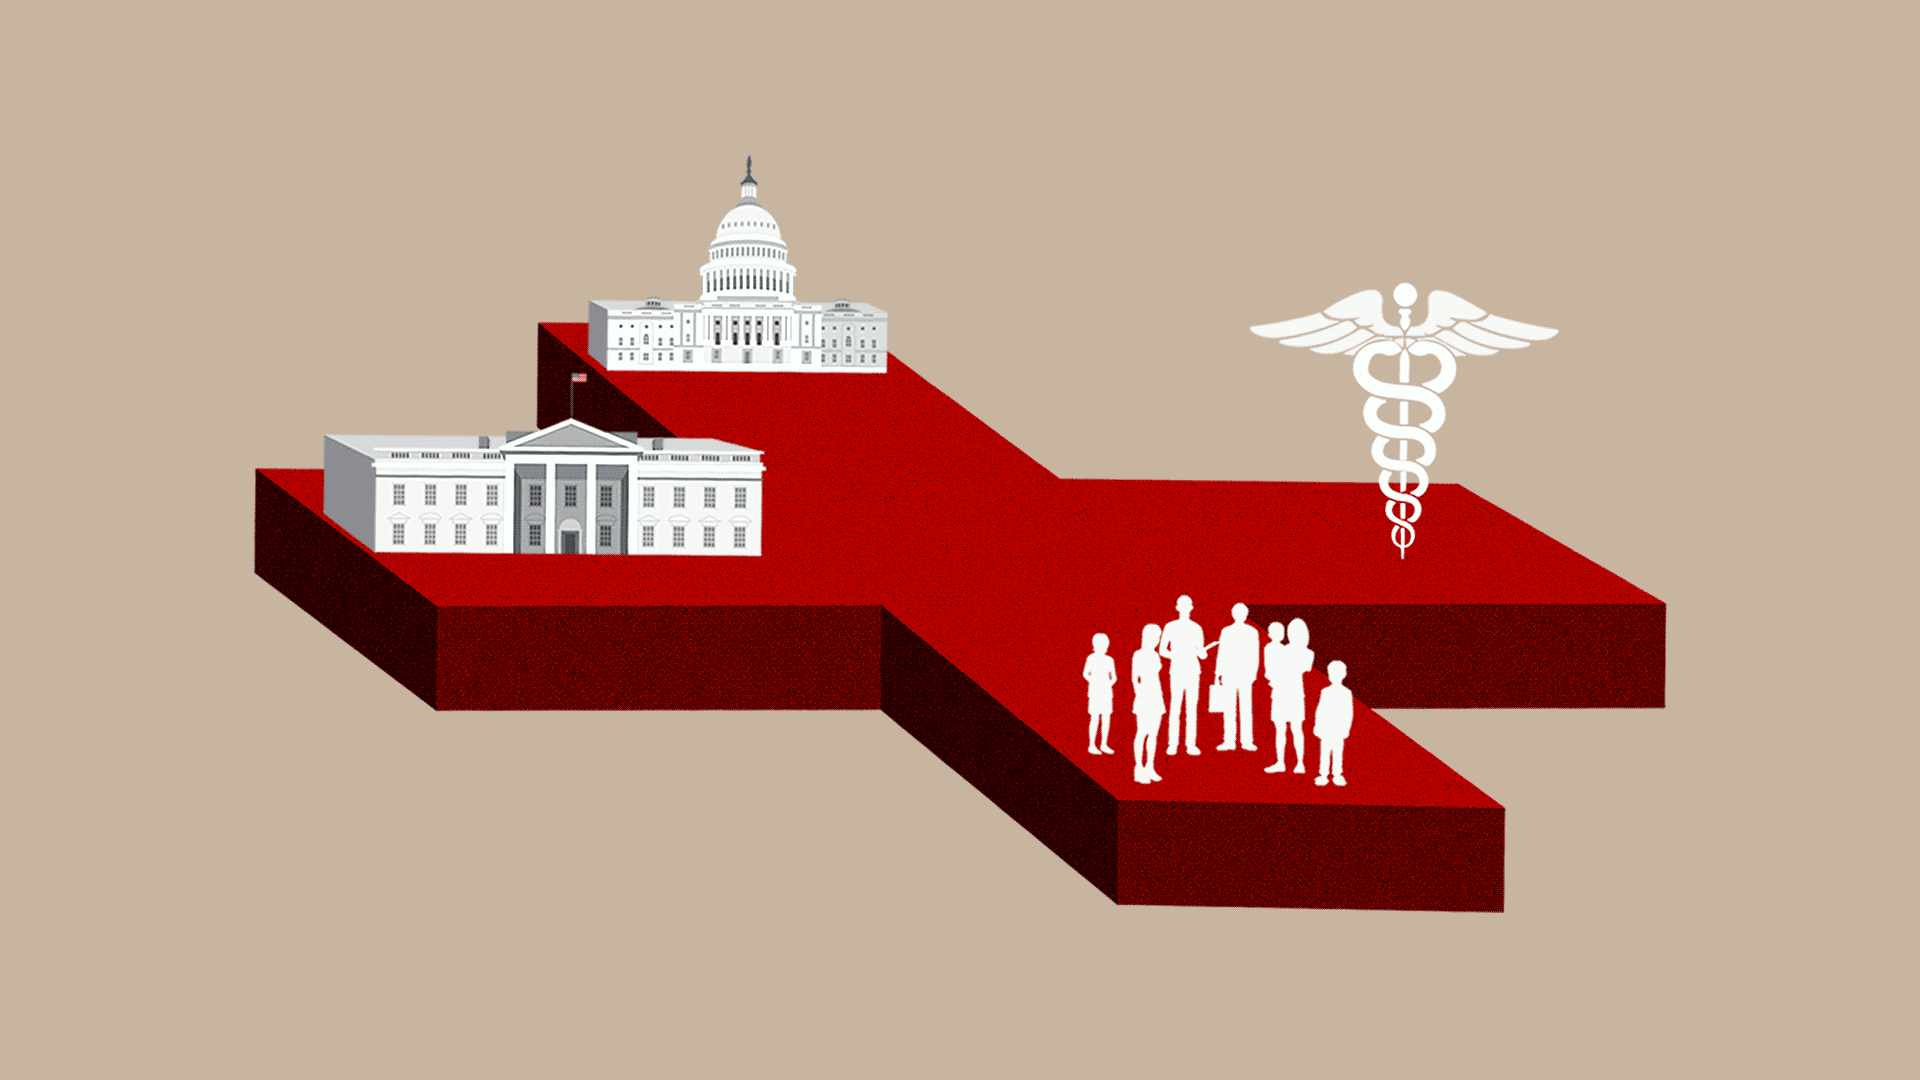 Animated GIF a red cross balancing the White House, Capital Building, a caduceus, and a group of people.